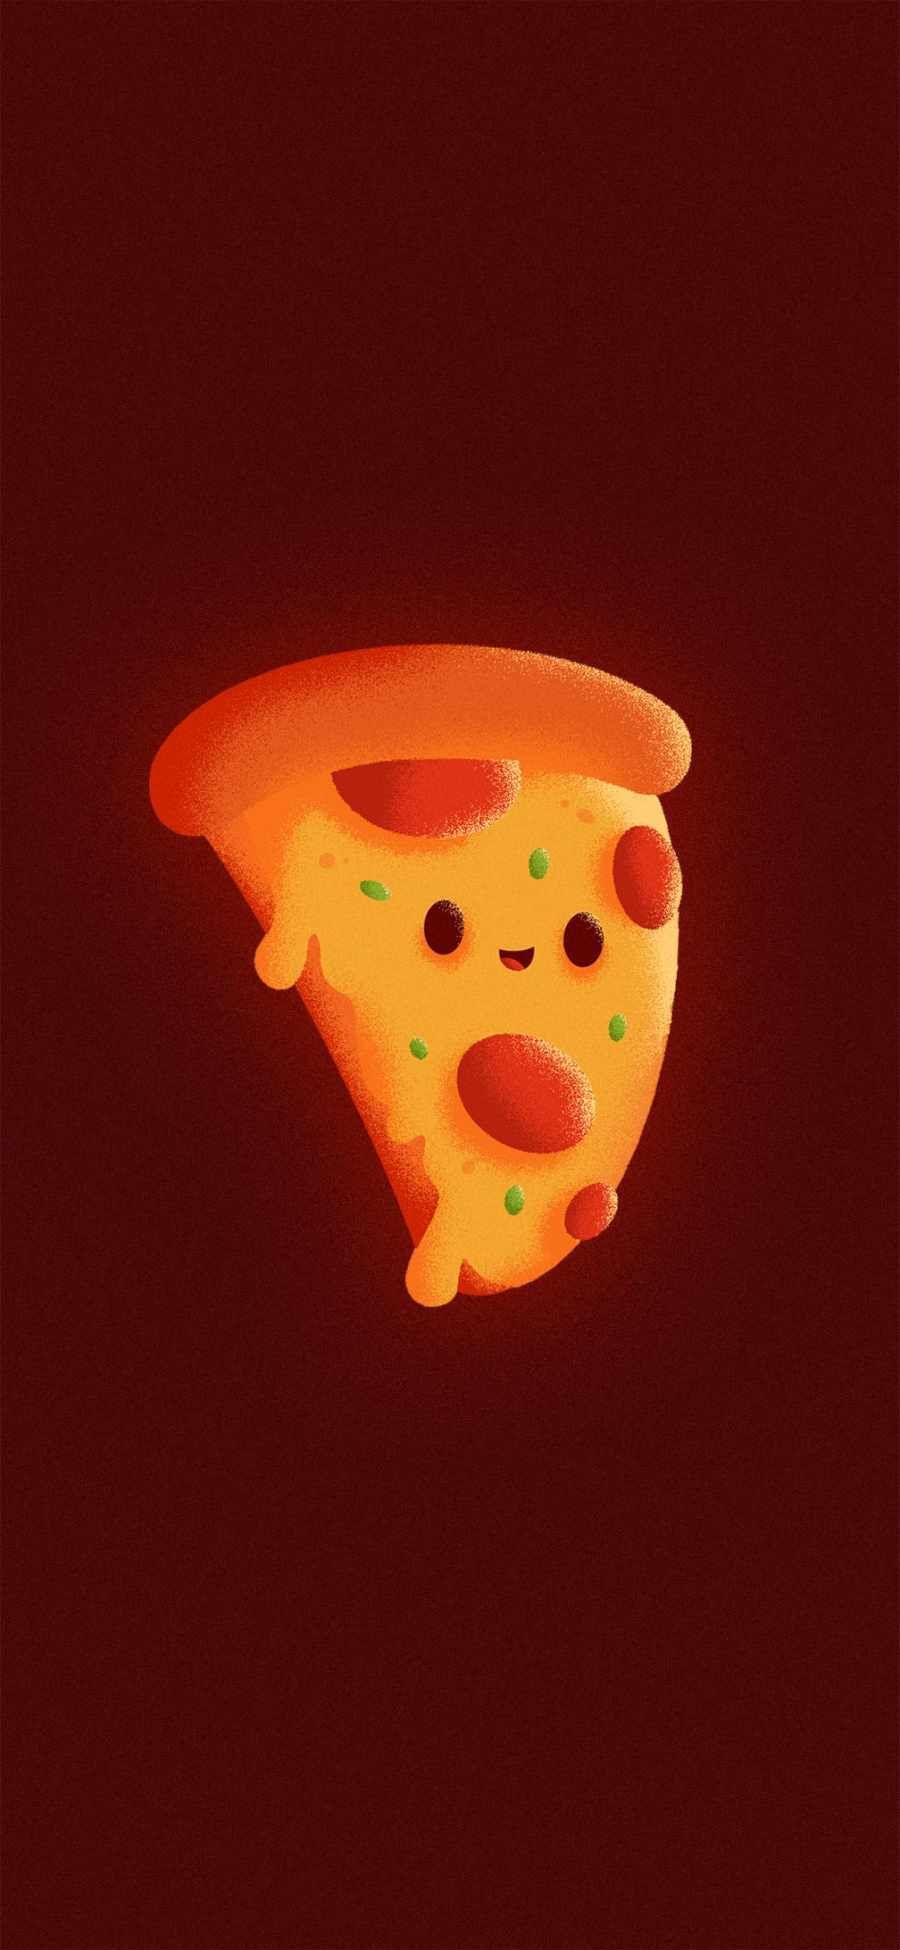 A cute illustration of a slice of pizza on a red background - Pizza